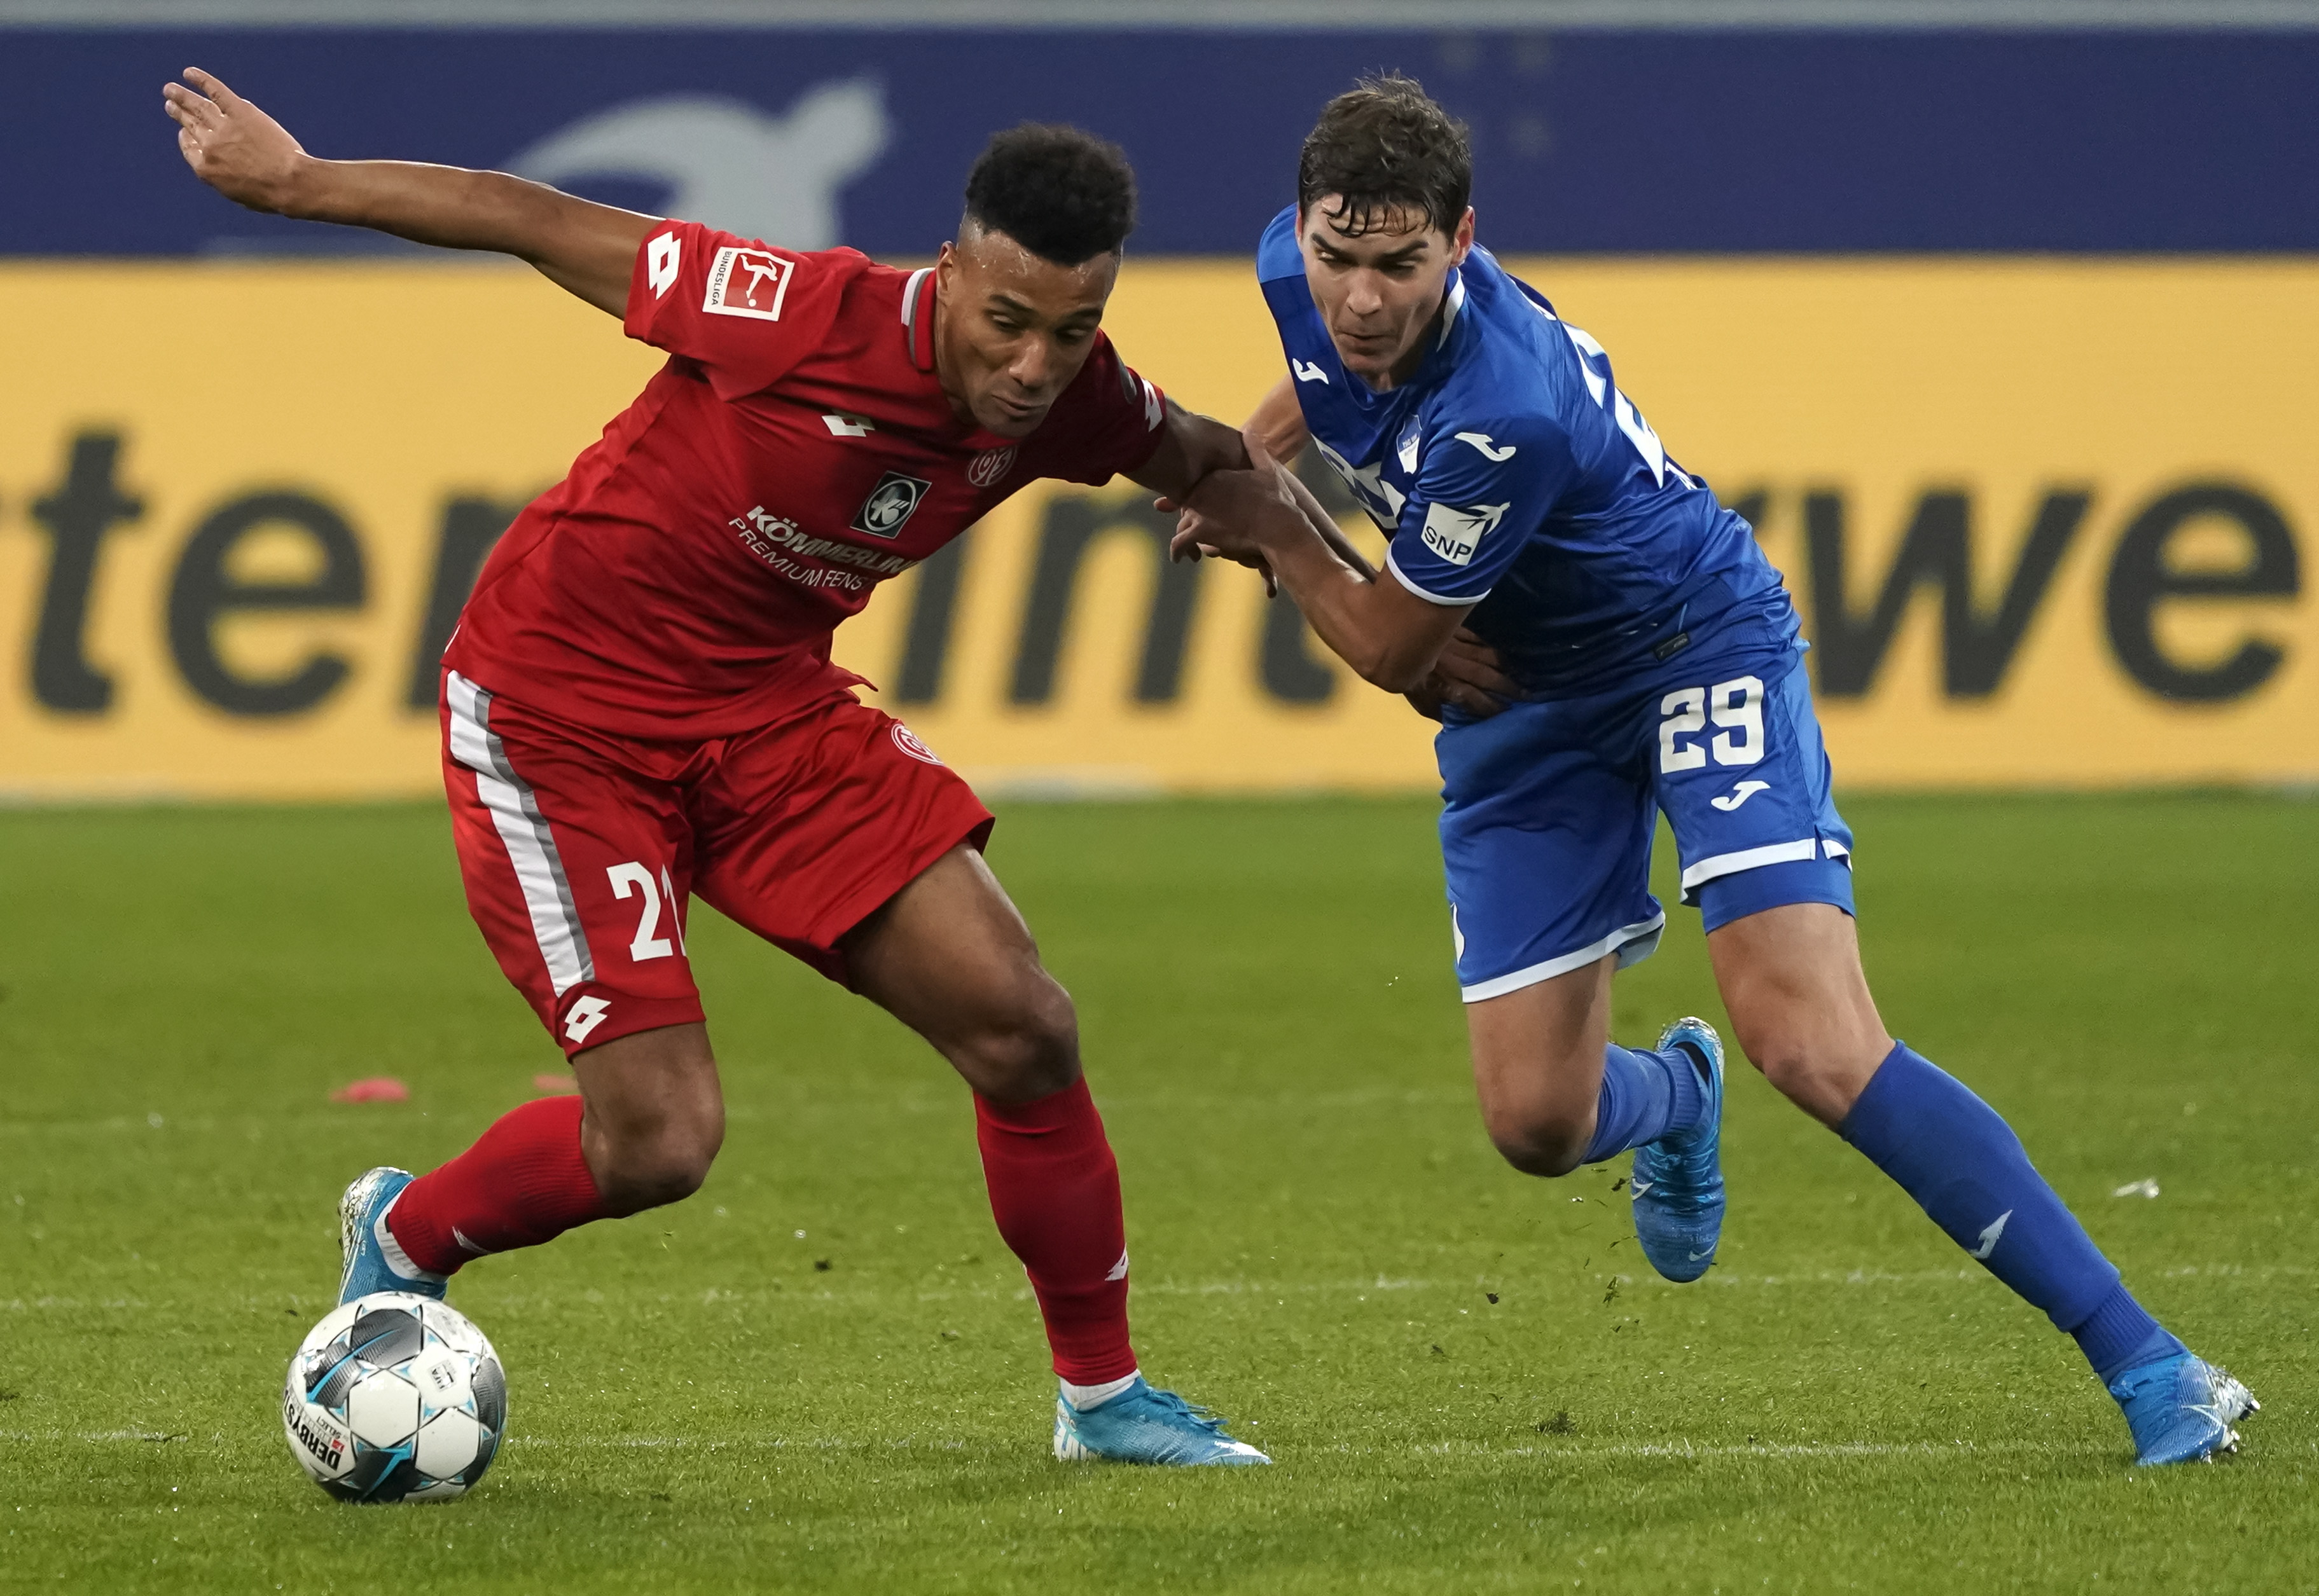 epa08022650 Robert Skov of Hoffenheim (R) in action against Karim Onisiwo of Mainz (L) during the German Bundesliga soccer match between TSG 1899 Hoffenheim and FSV Mainz 05 in Sinsheim, Germany, 24 November 2019.  EPA/RONALD WITTEK CONDITIONS - ATTENTION: The DFL regulations prohibit any use of photographs as image sequences and/or quasi-video.